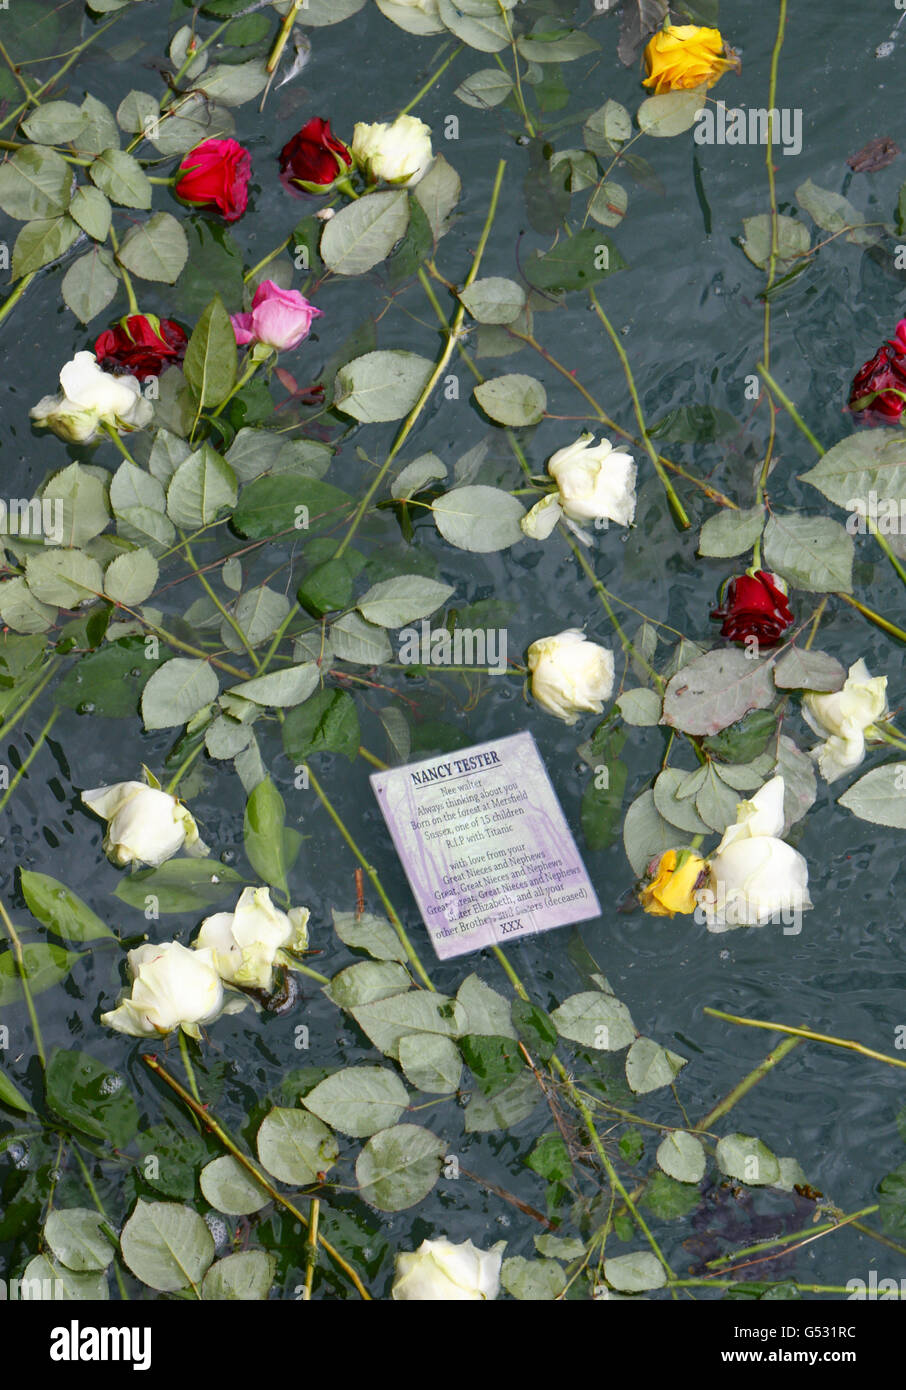 A memorial to Nancy Tester, a victim of the Titanic disaster, floats amongst roses in the dock in Southampton, from where the ill-fated liner sailed 100 years ago today. Stock Photo